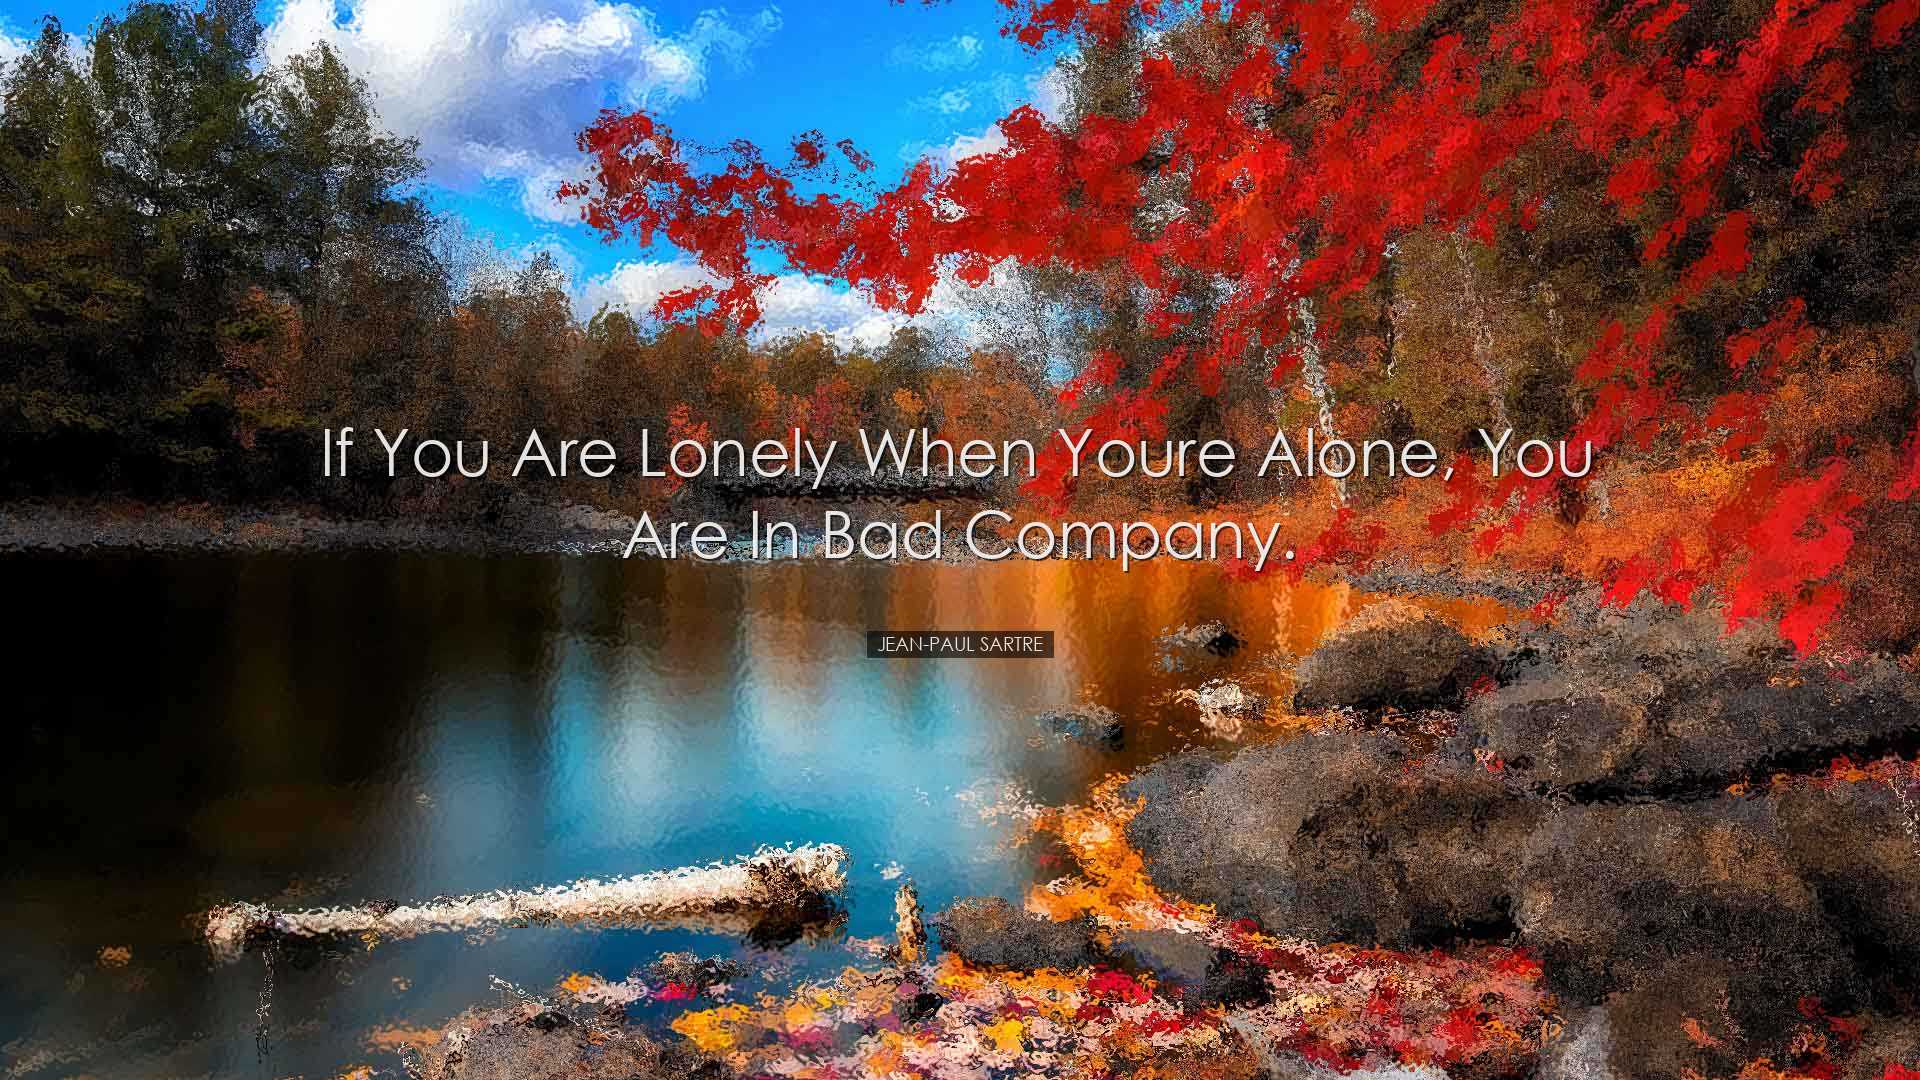 If you are lonely when youre alone, you are in bad company. - Jean